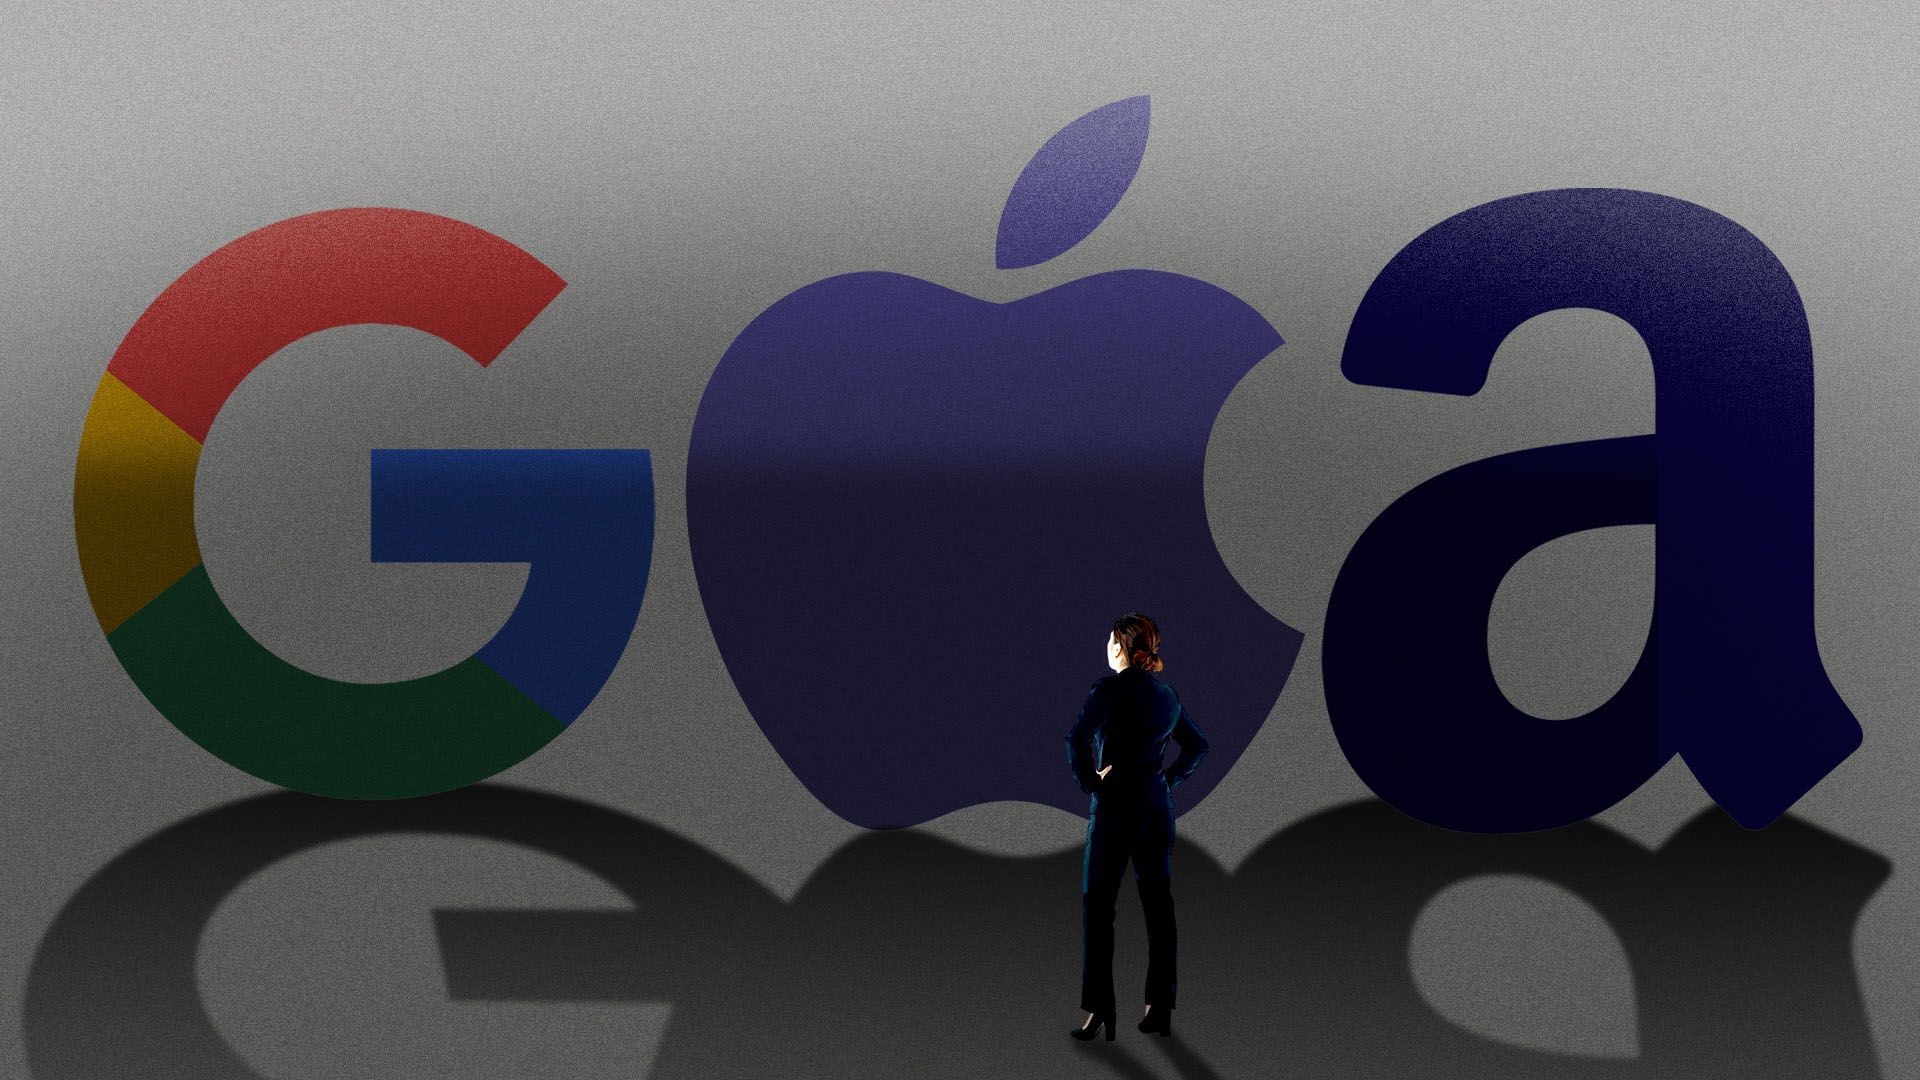  Illustration of the Google, Apple, and Amazon logos casting long shadows on a small woman in tech in the foreground